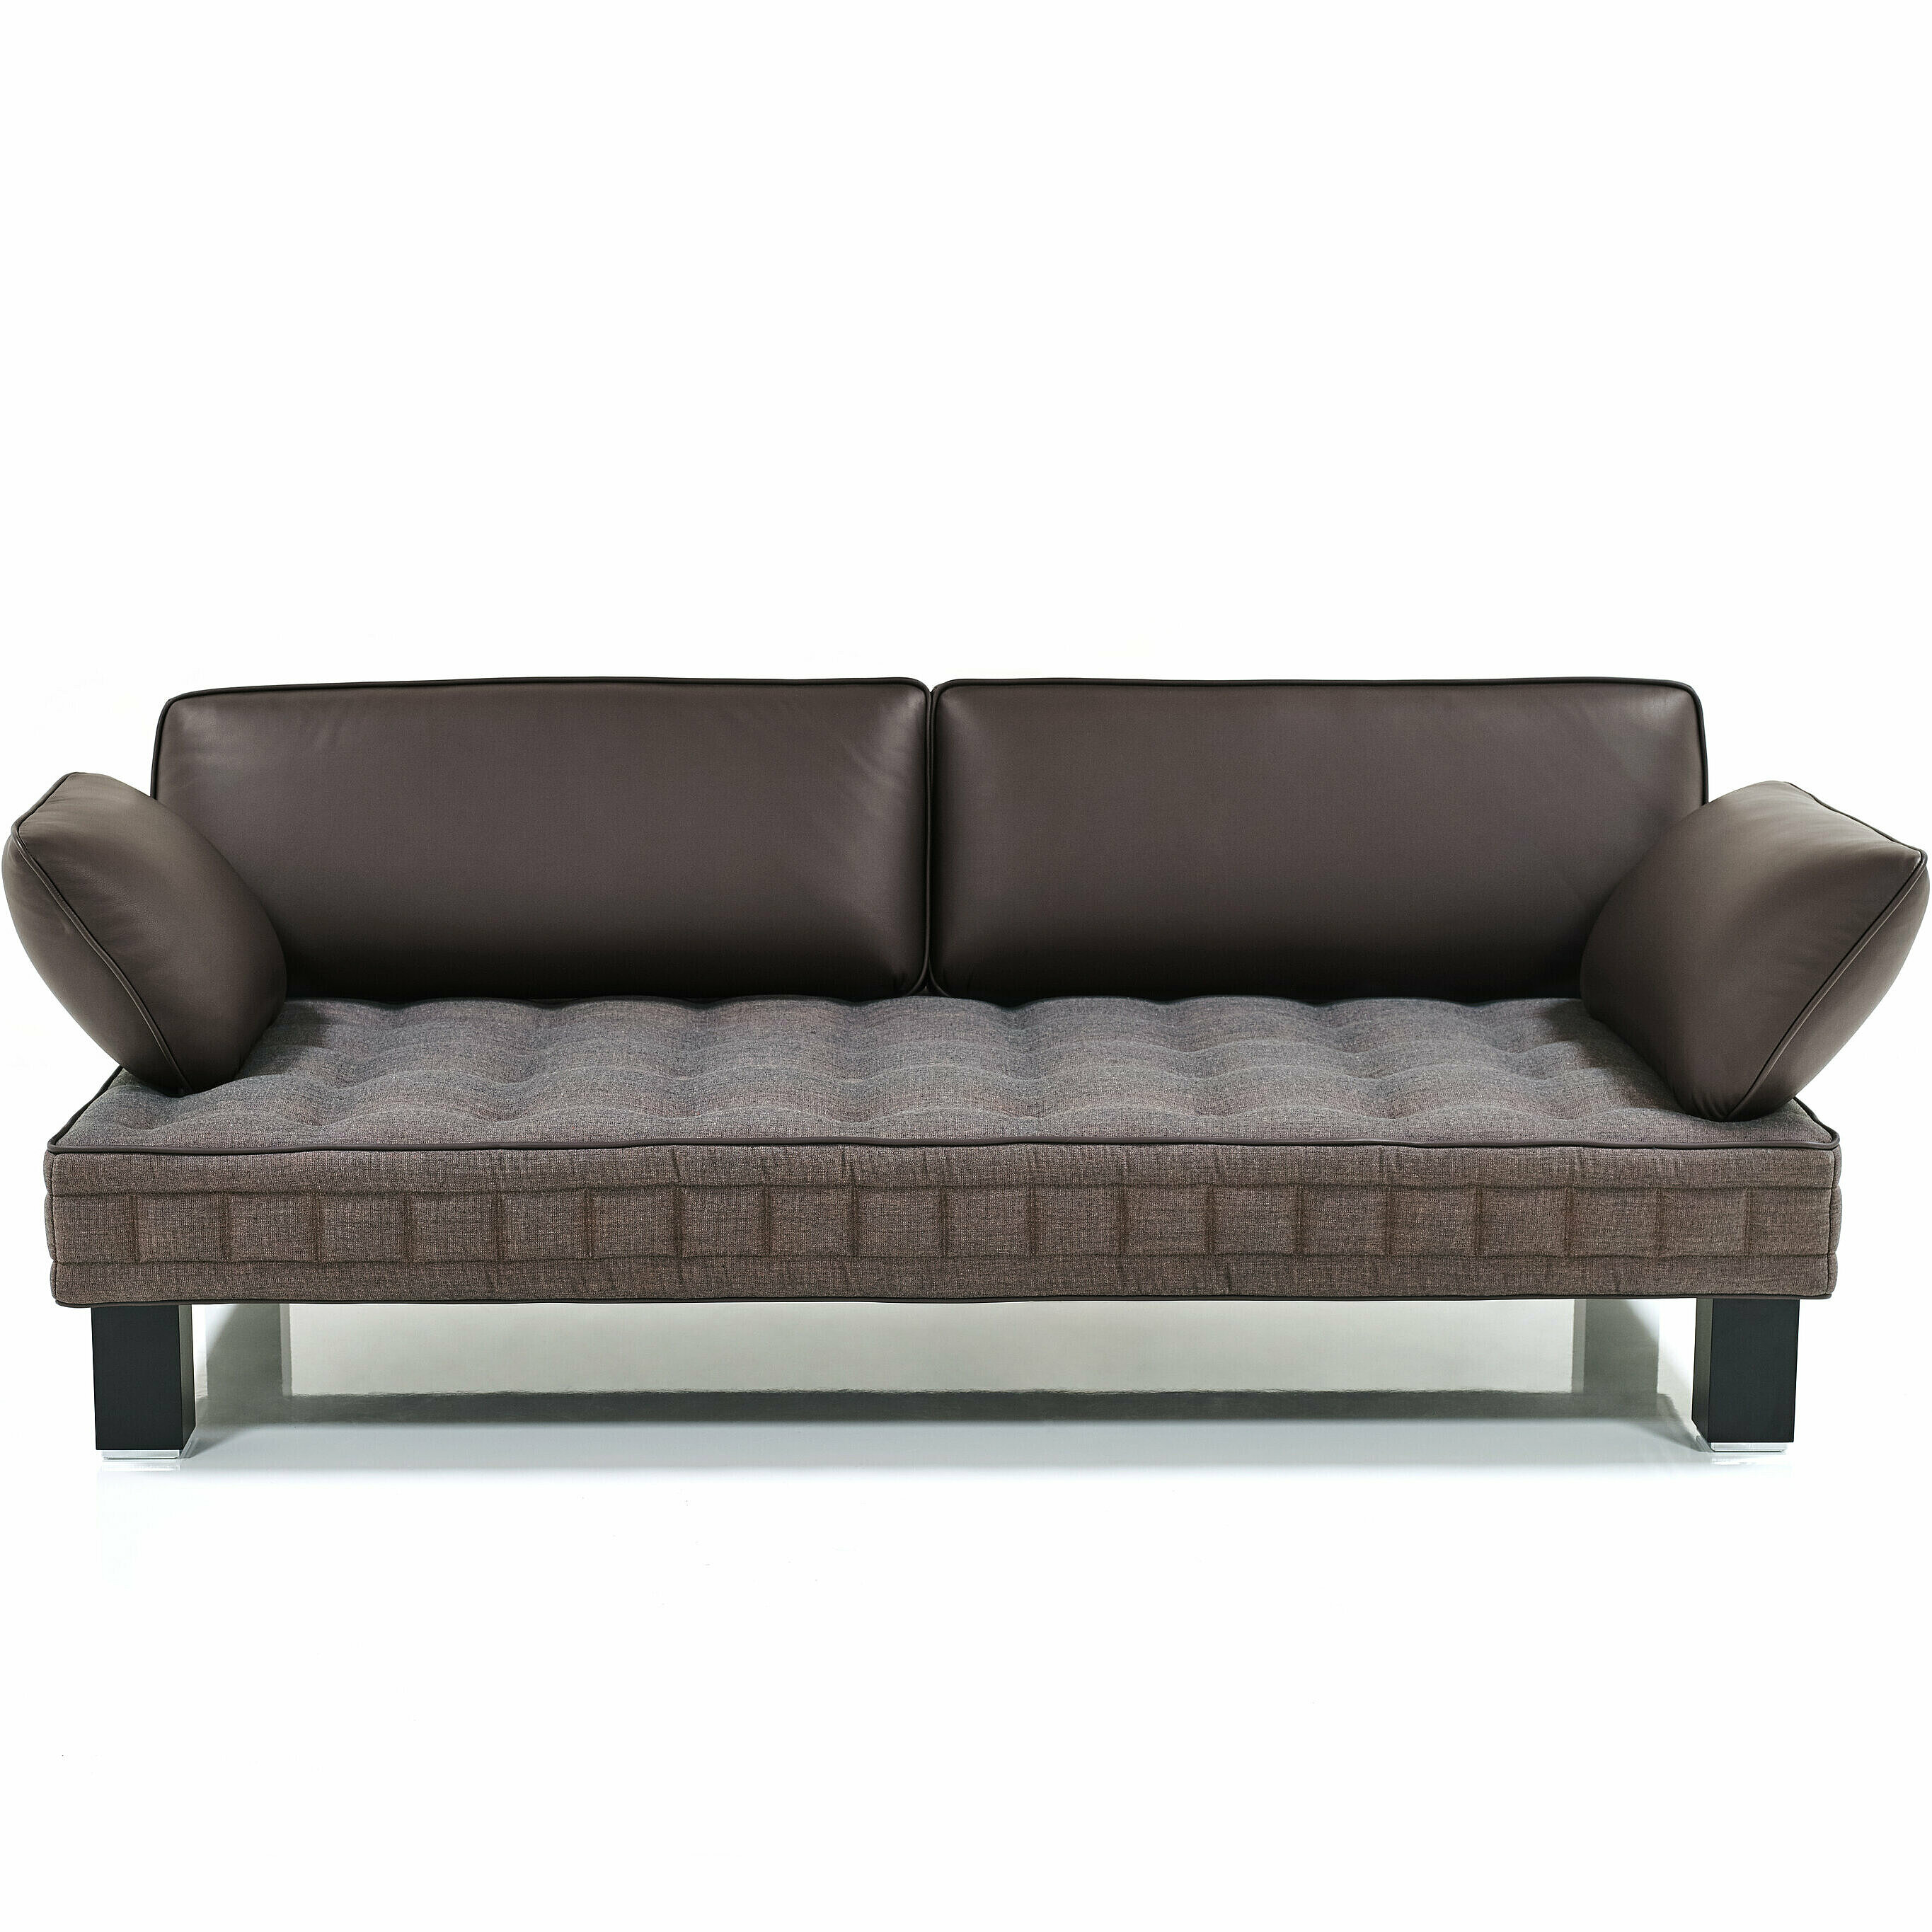 Materassi Sofa with seat in Arena-bronce and backrests + piping in leather Color-aubergine